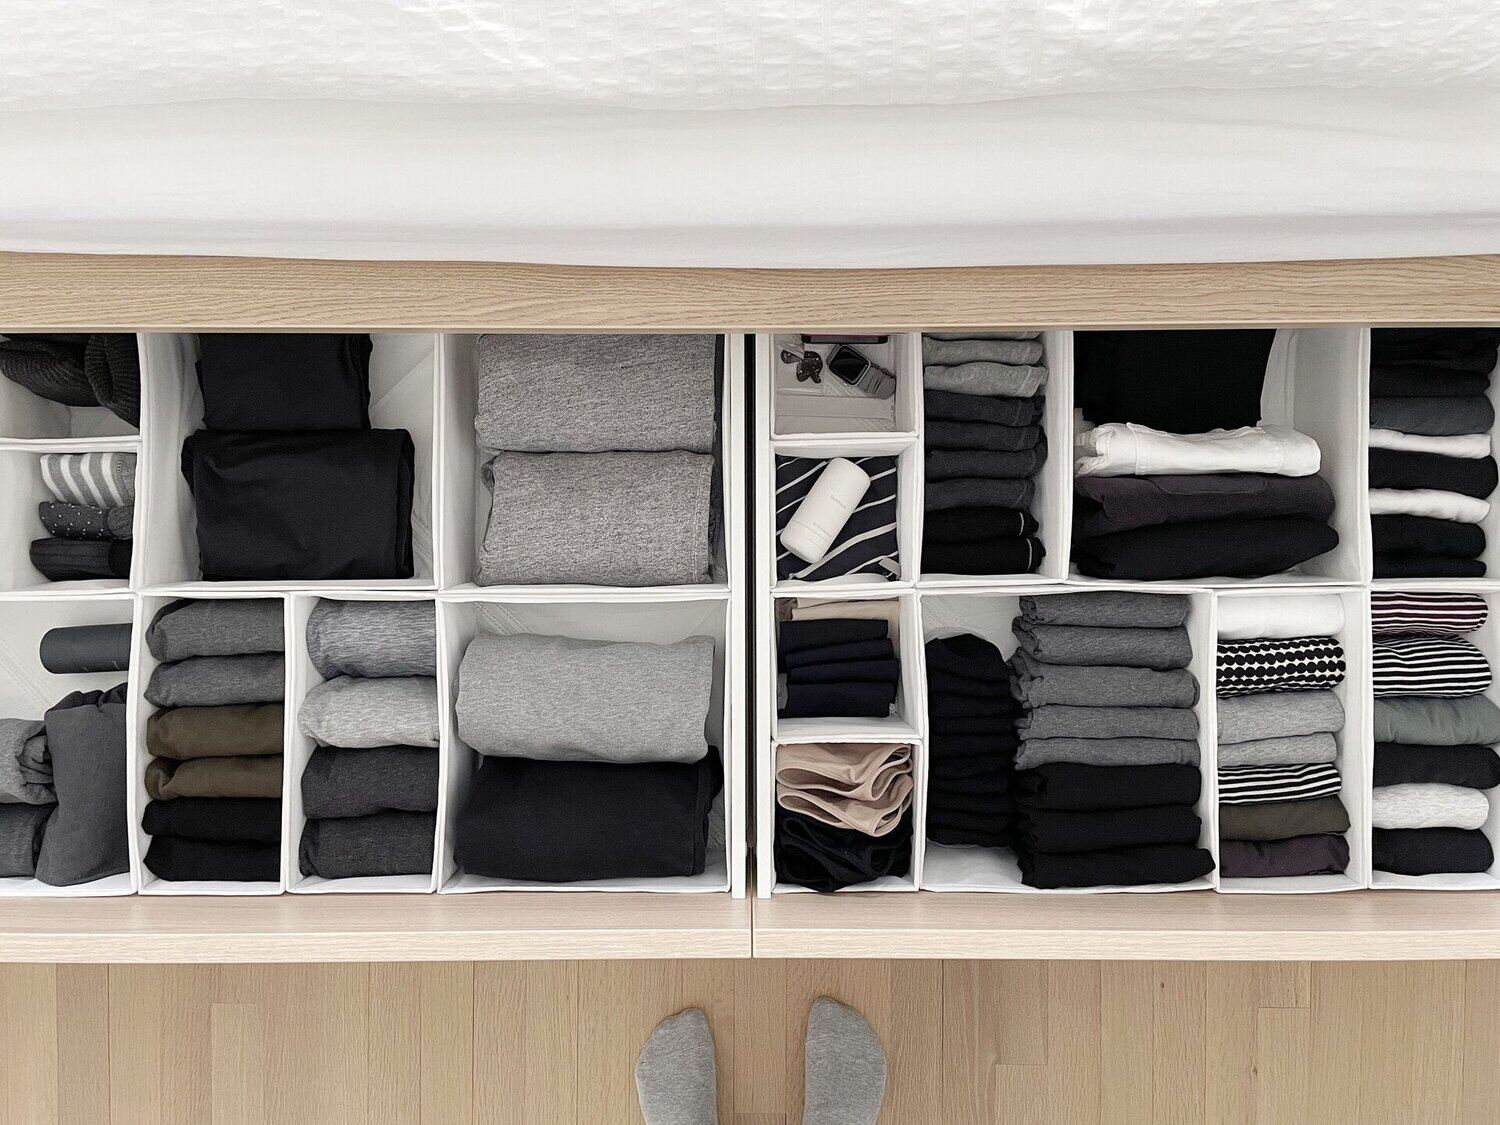 How To Store Folded Clothes Without A Dresser